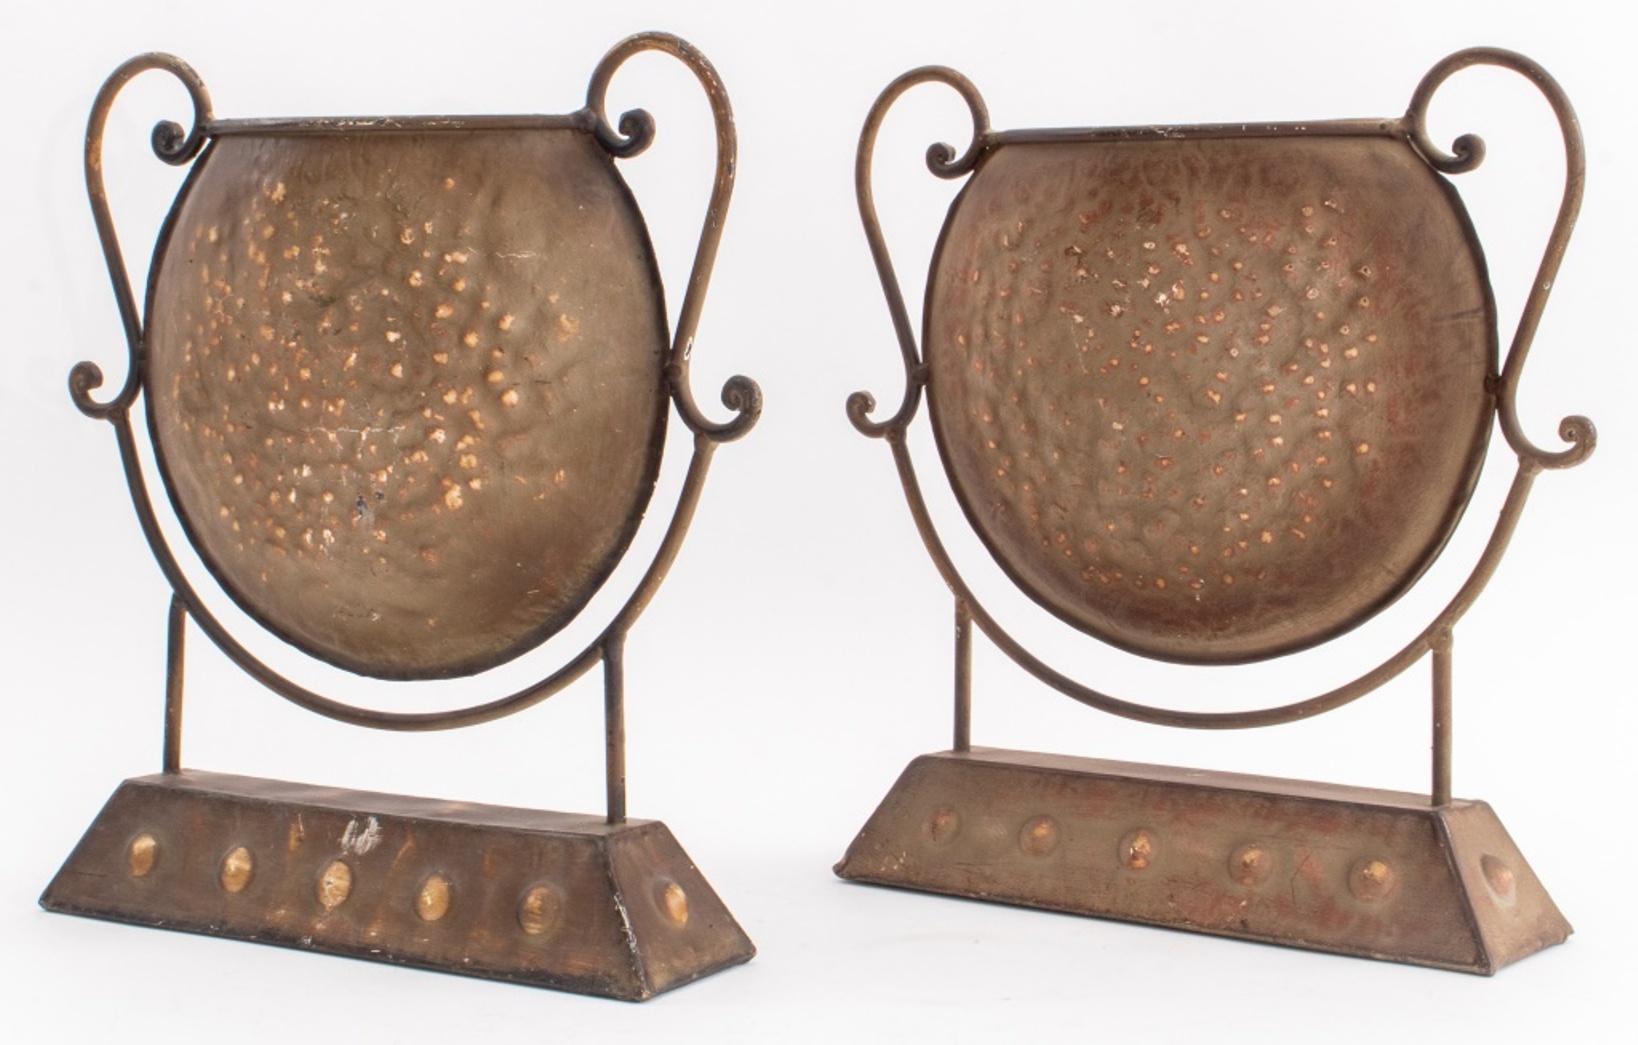 20th Century Patinated Metal Plant Vessels on Stands, Pair